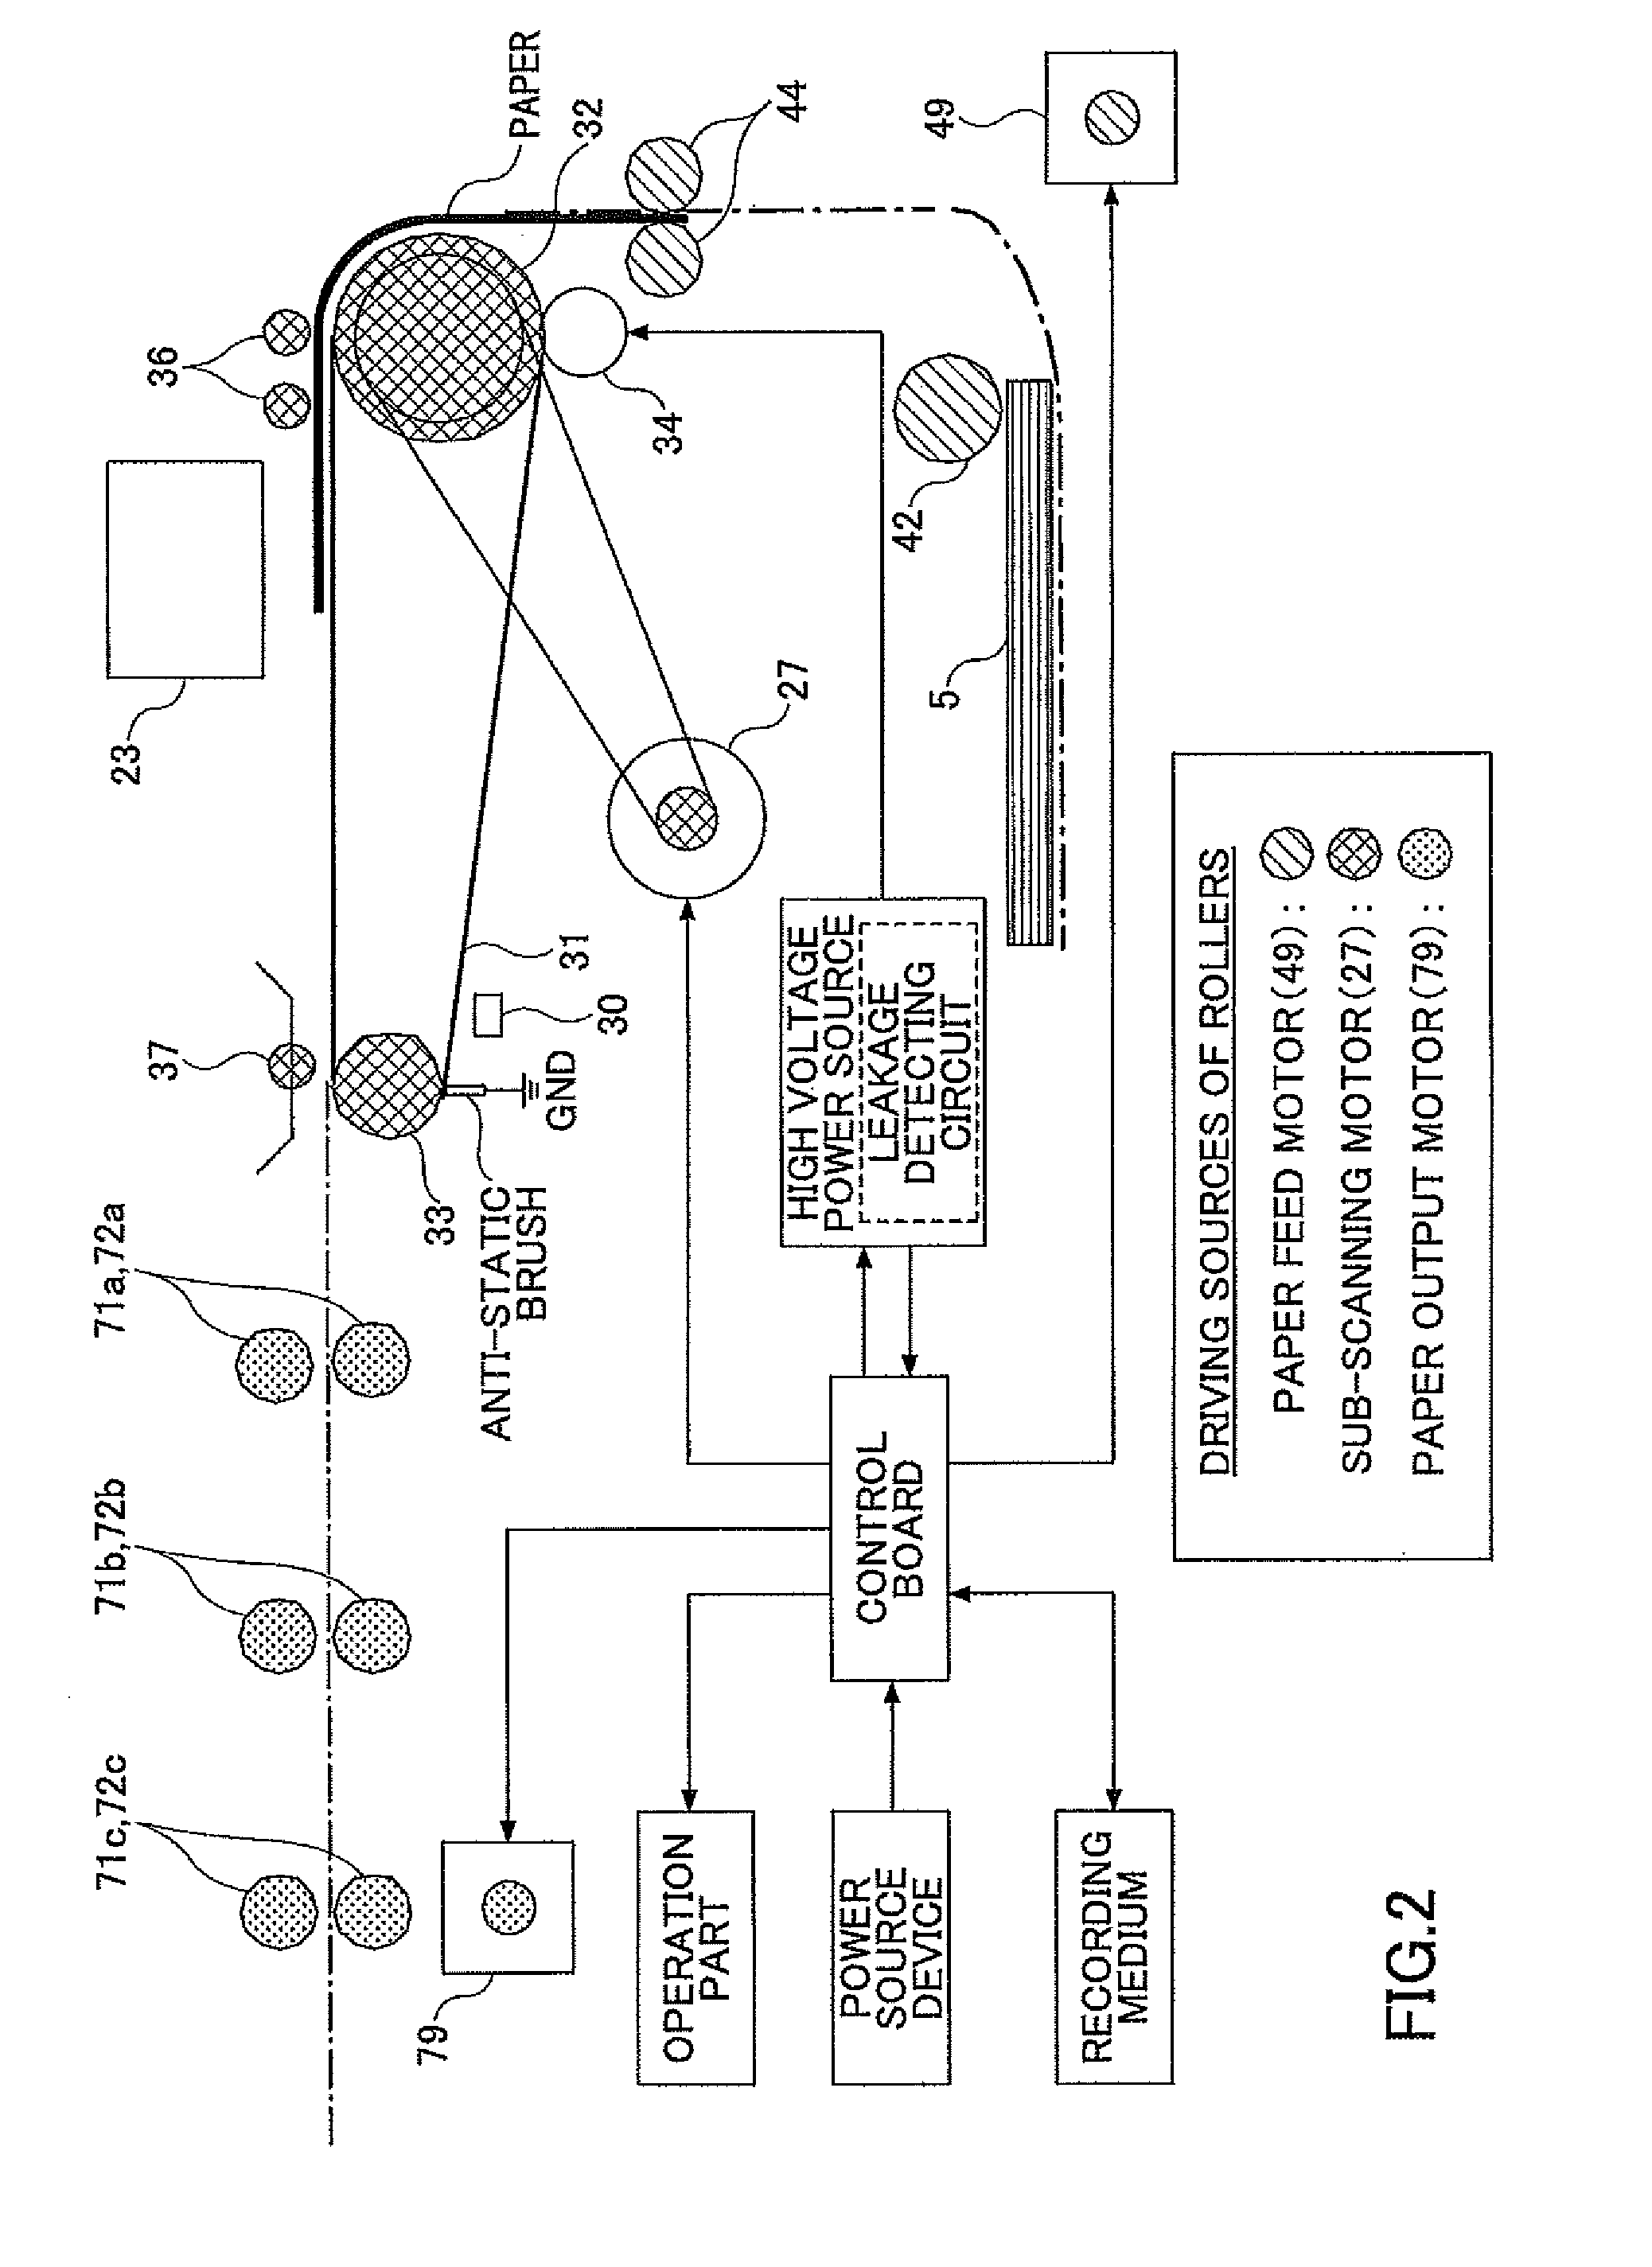 Transfer apparatus, method for preventing leakage current of the transfer apparatus, and image forming apparatus including the transfer apparatus